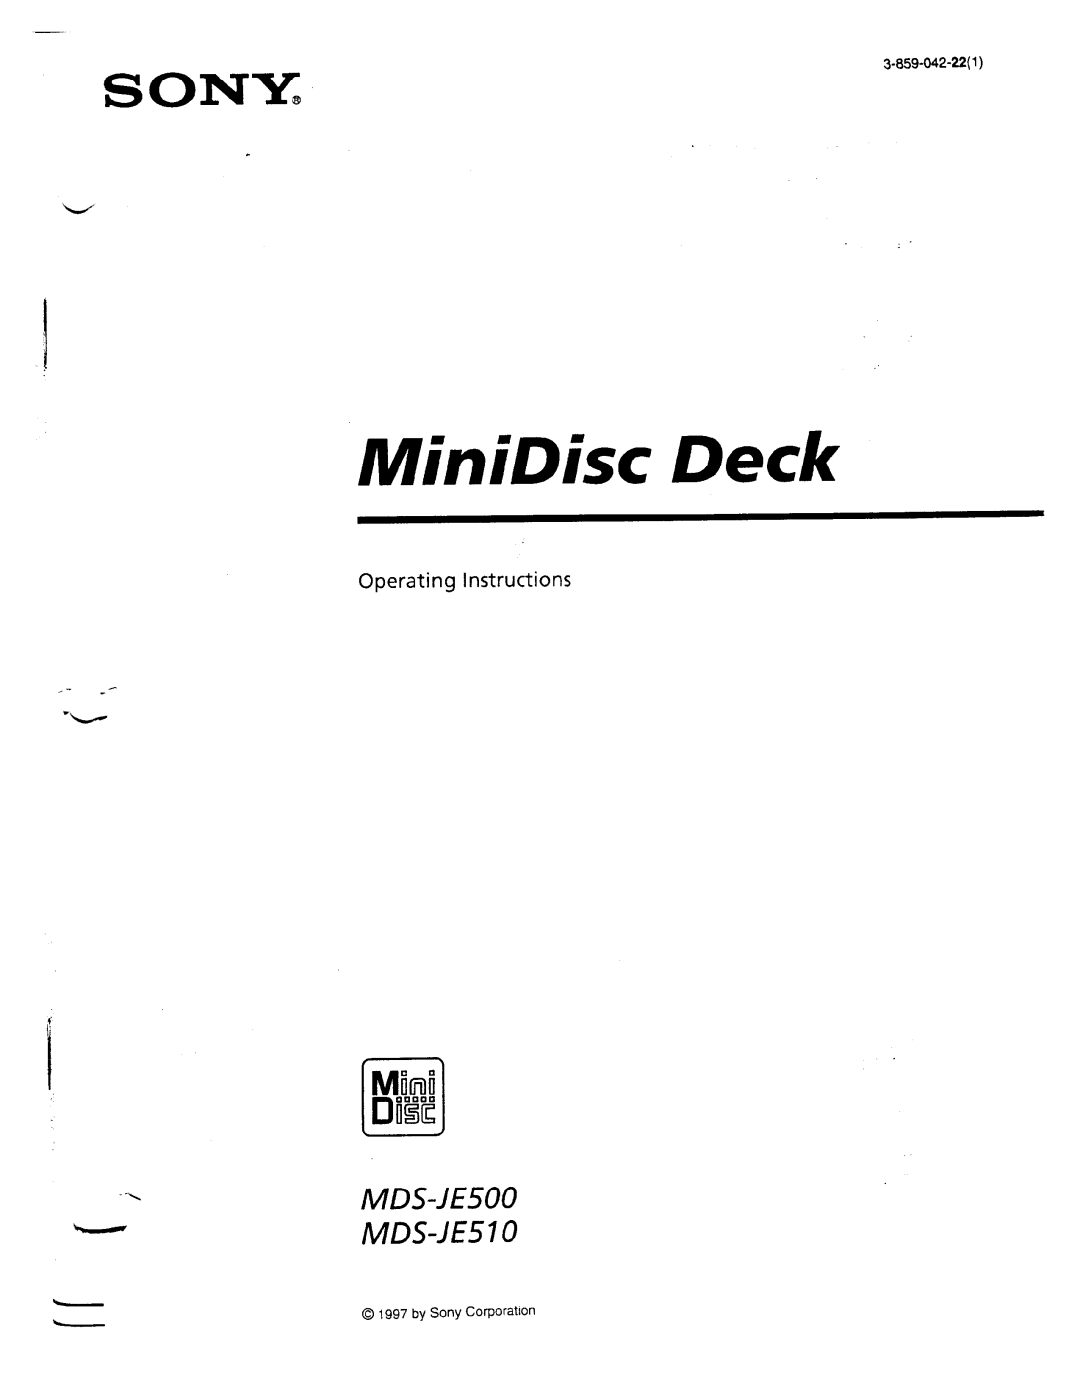 Sony MDS-JE500 operating instructions Operating Instructions, MiniDisc Deck, 3-856-651-211, by Sony Corporation 